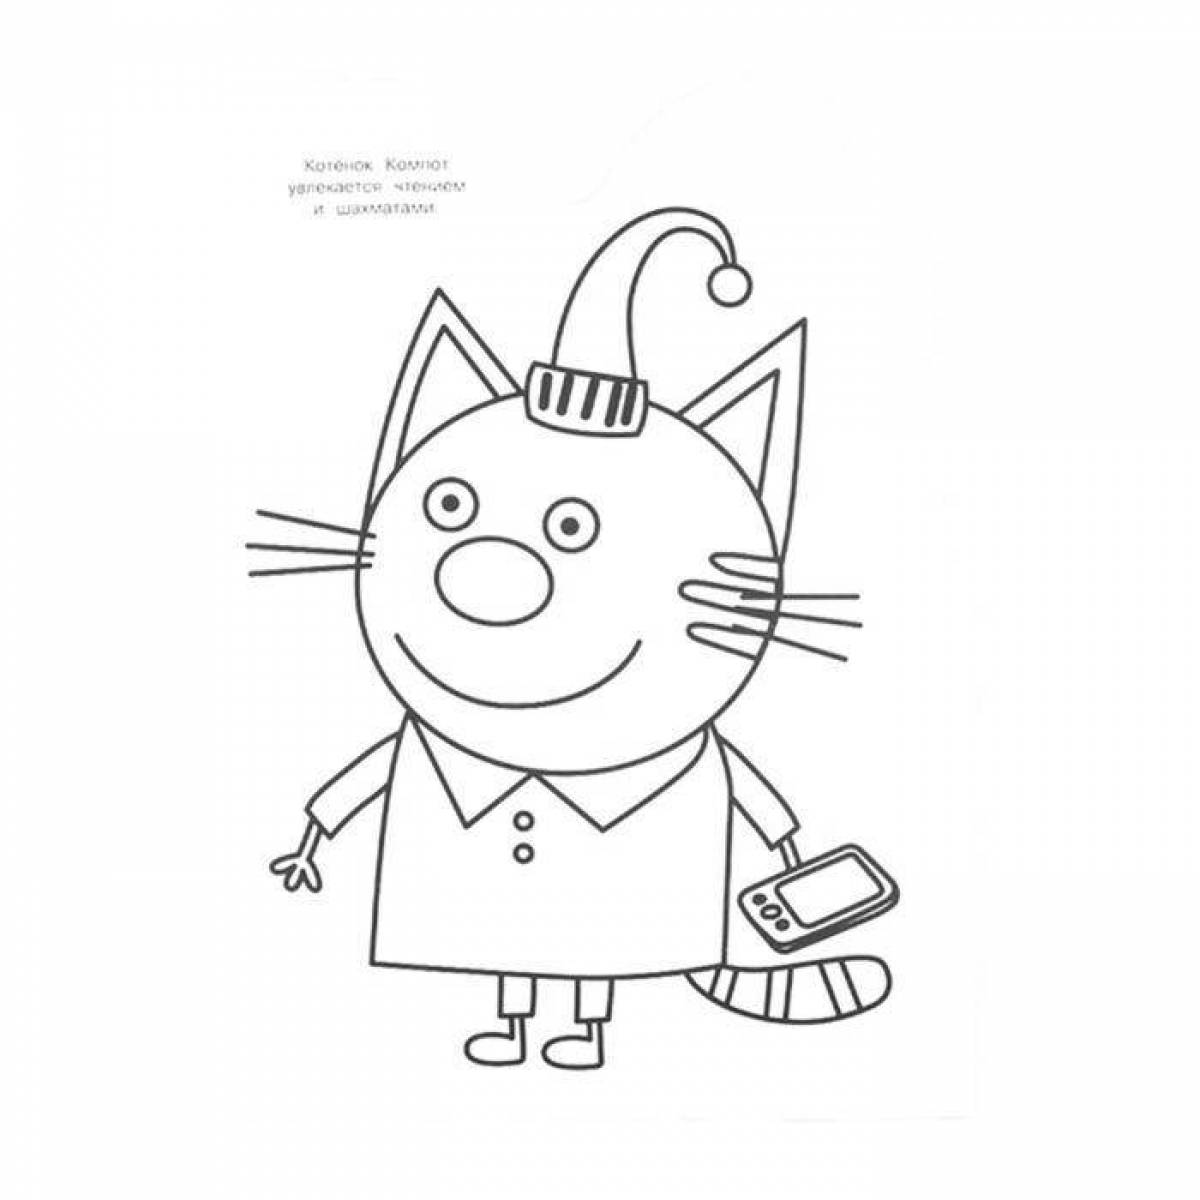 Coloring book delicious compote of three cats